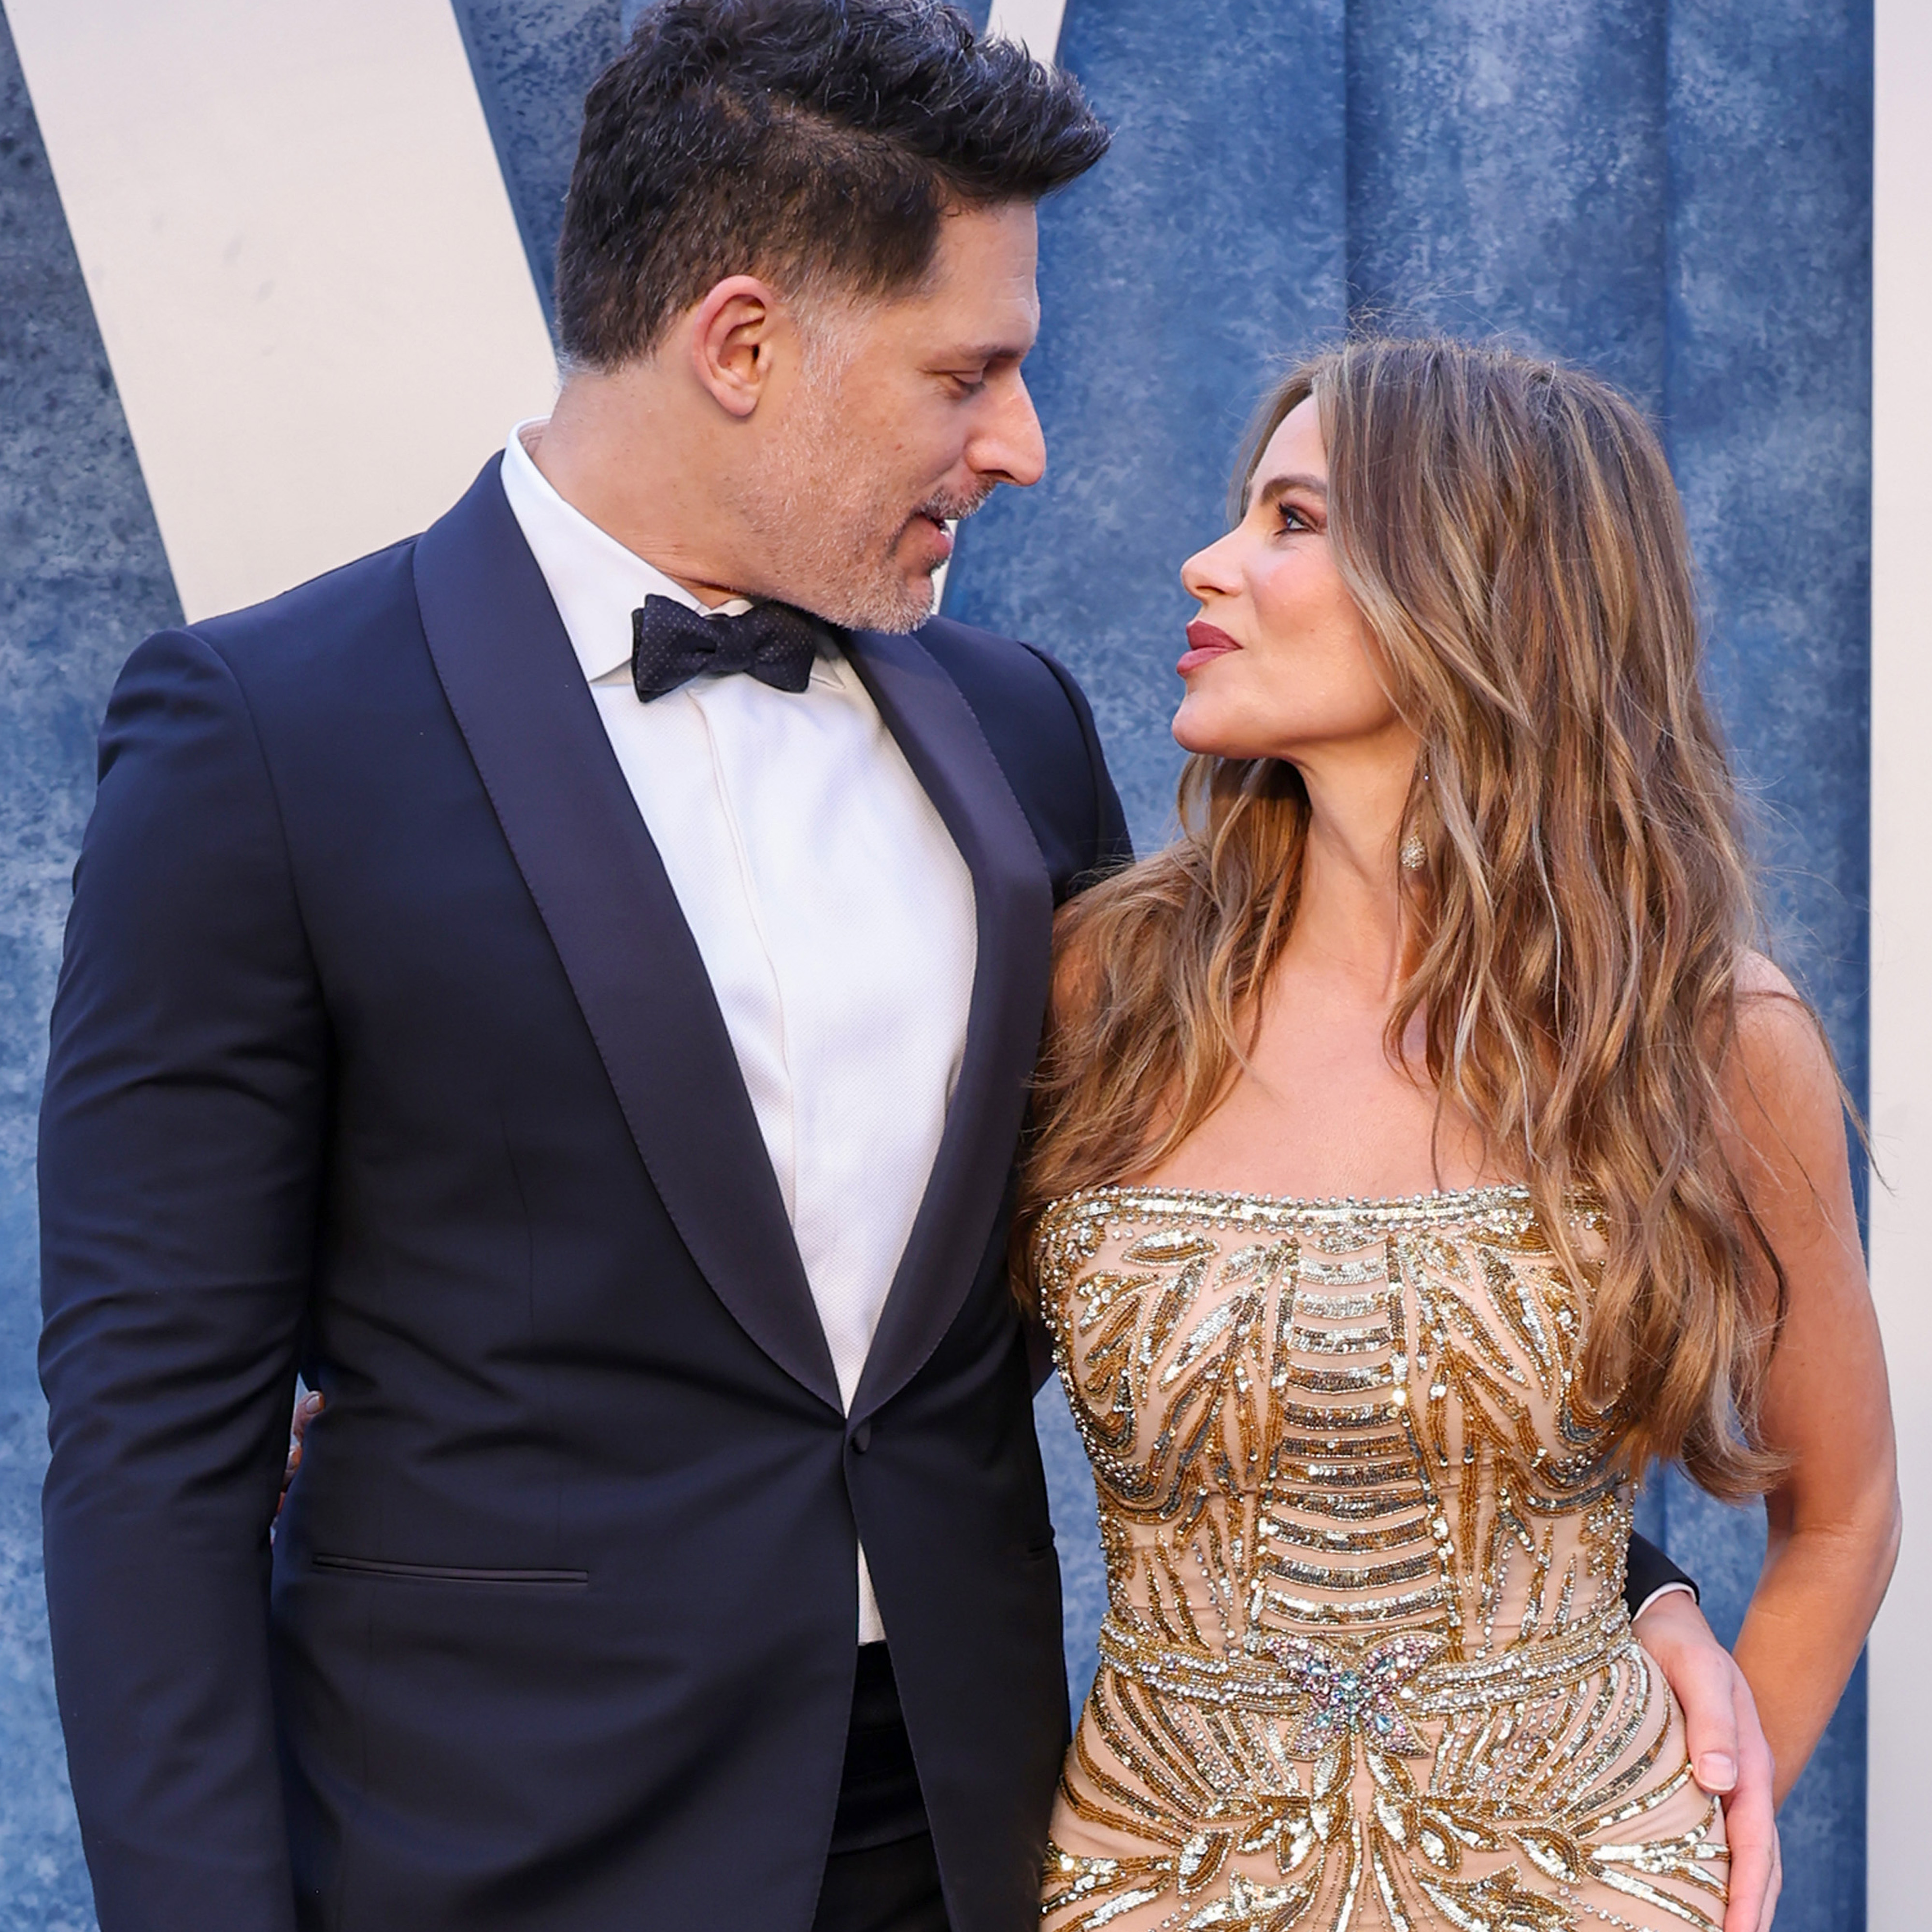 Joe Manganiello and Sofia Vergara attend the the Vanity Fair Oscar Party on March 12, 2023 in Beverly Hills, California | Source: Getty Images